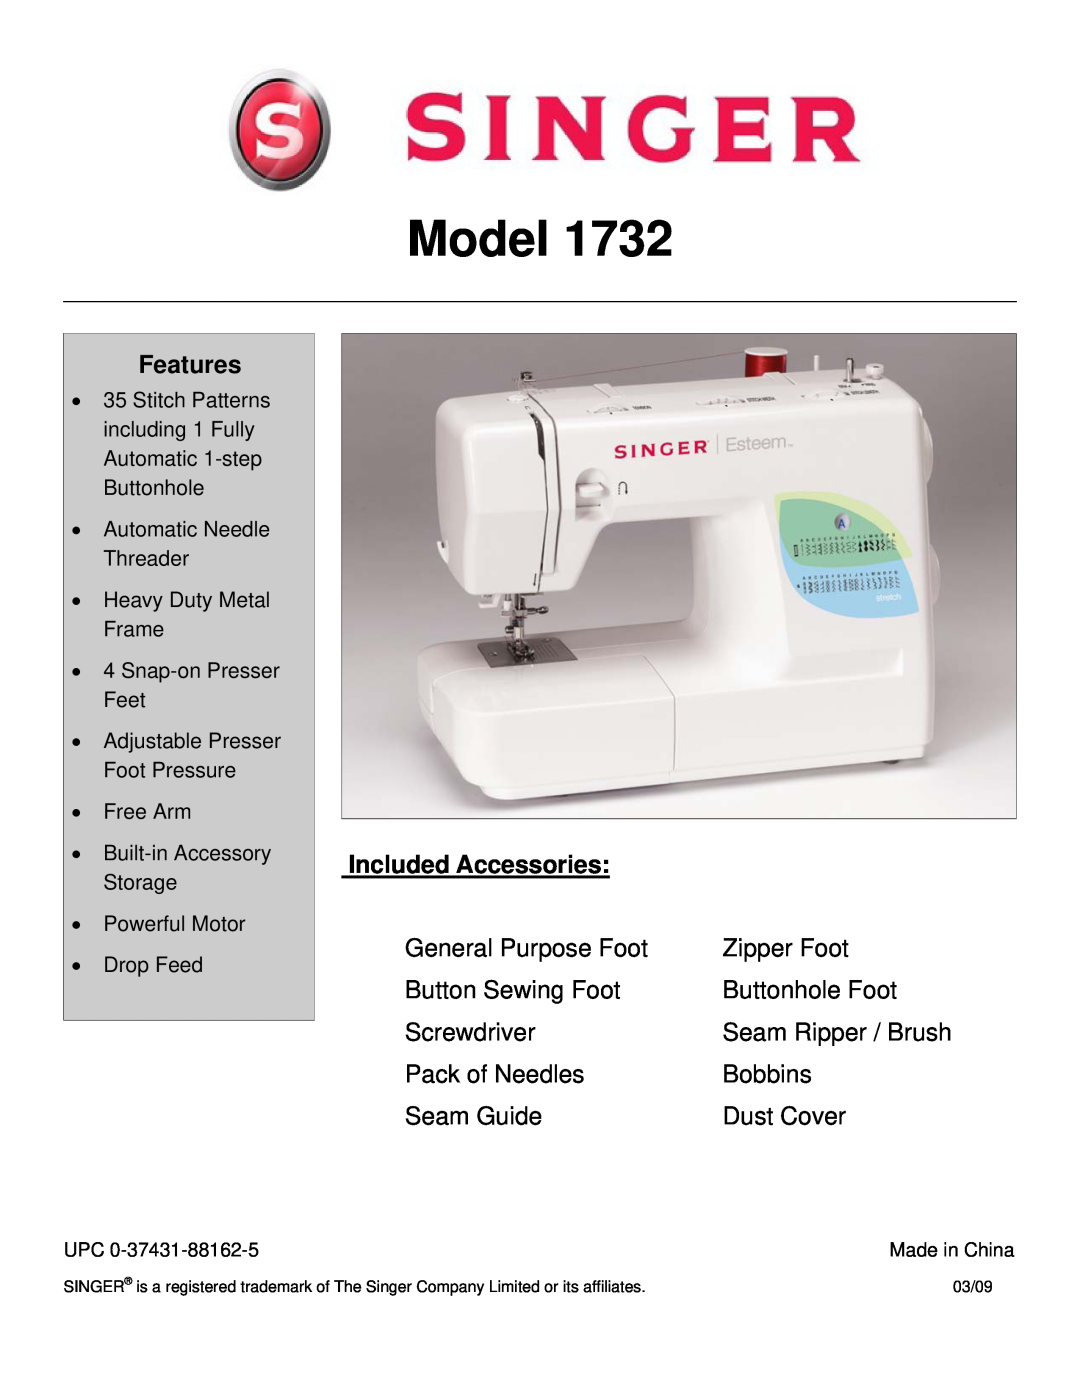 Singer 1732 manual Model, Features, Included Accessories, General Purpose Foot, Zipper Foot, Button Sewing Foot, Bobbins 